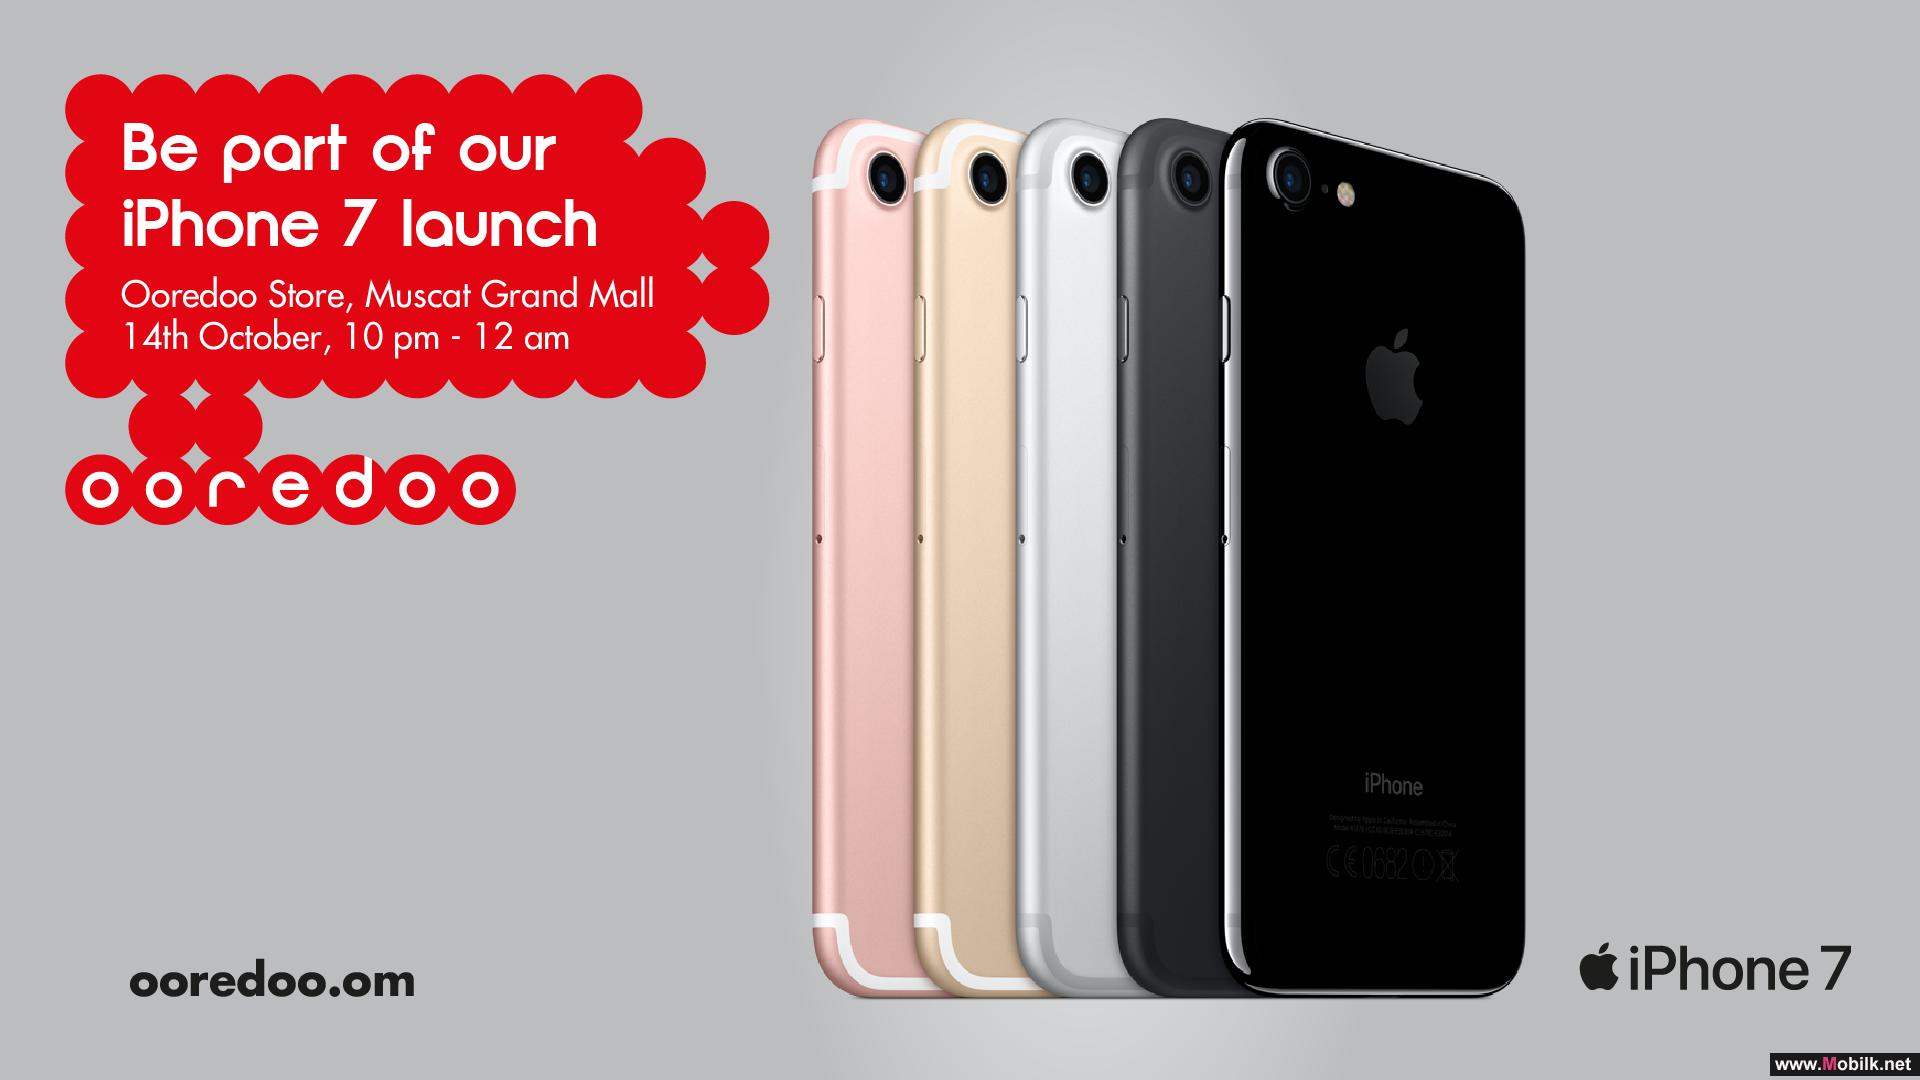 Ooredoo to Hold Launch of the iPhone 7 in Oman